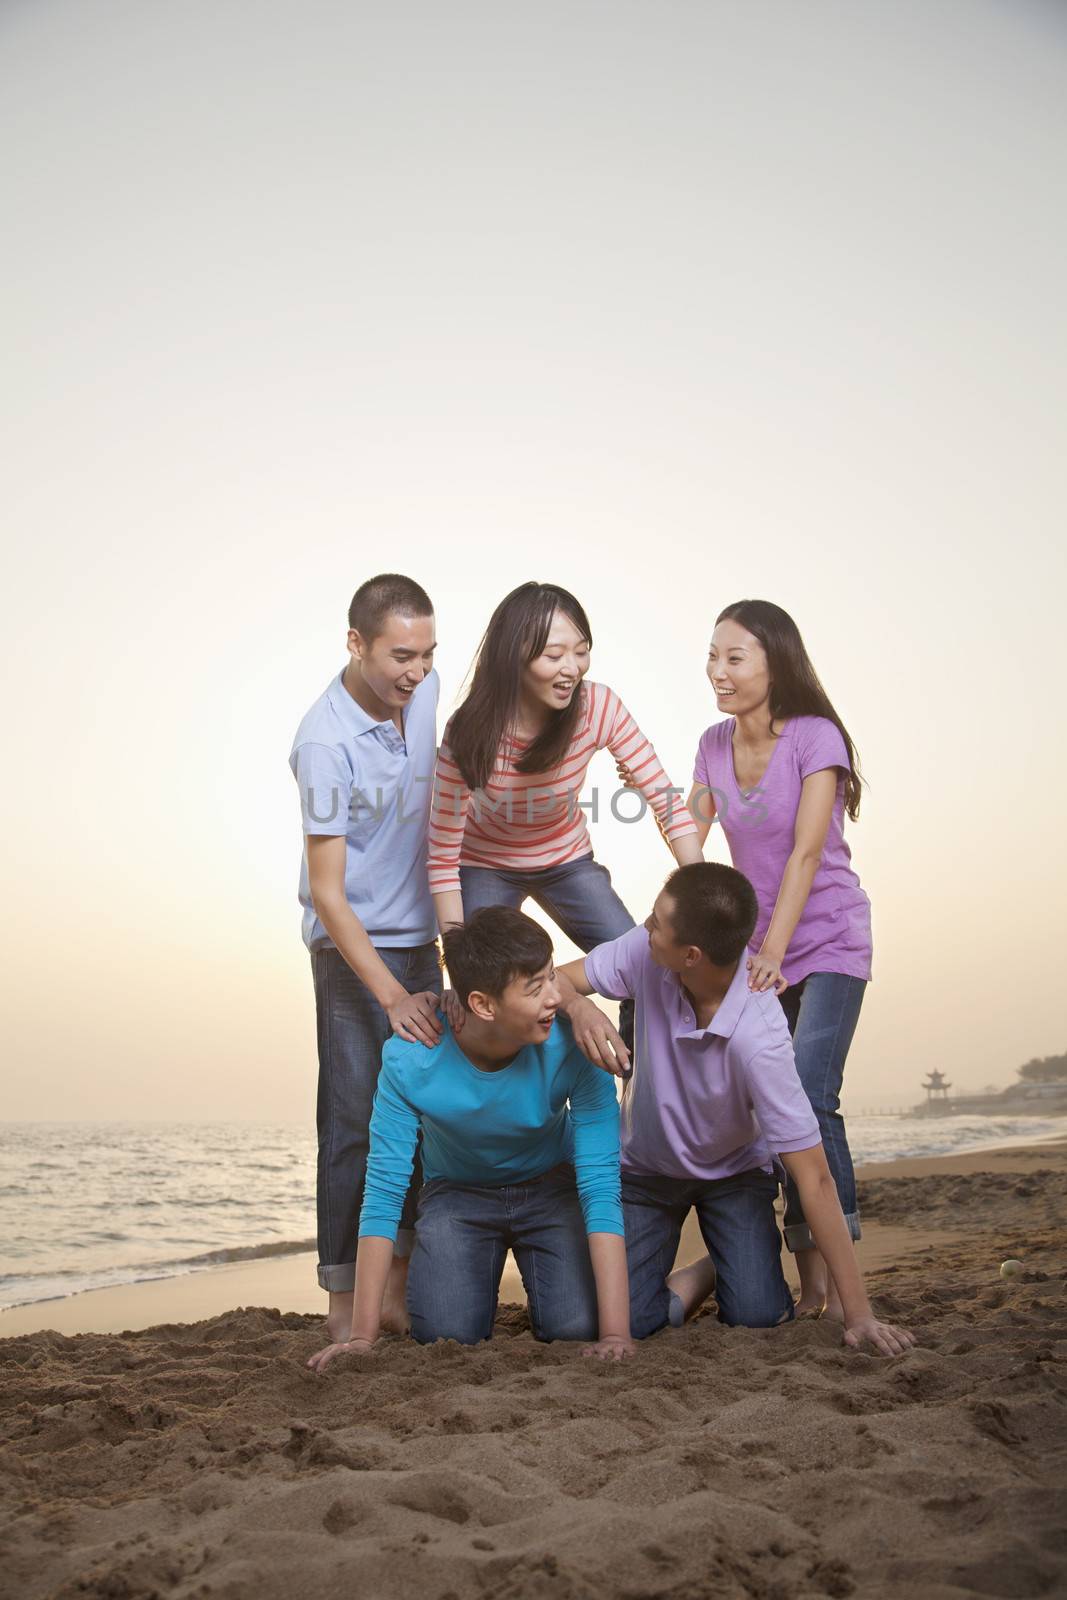 Group of Friends Making Human Pyramid on the Beach by XiXinXing